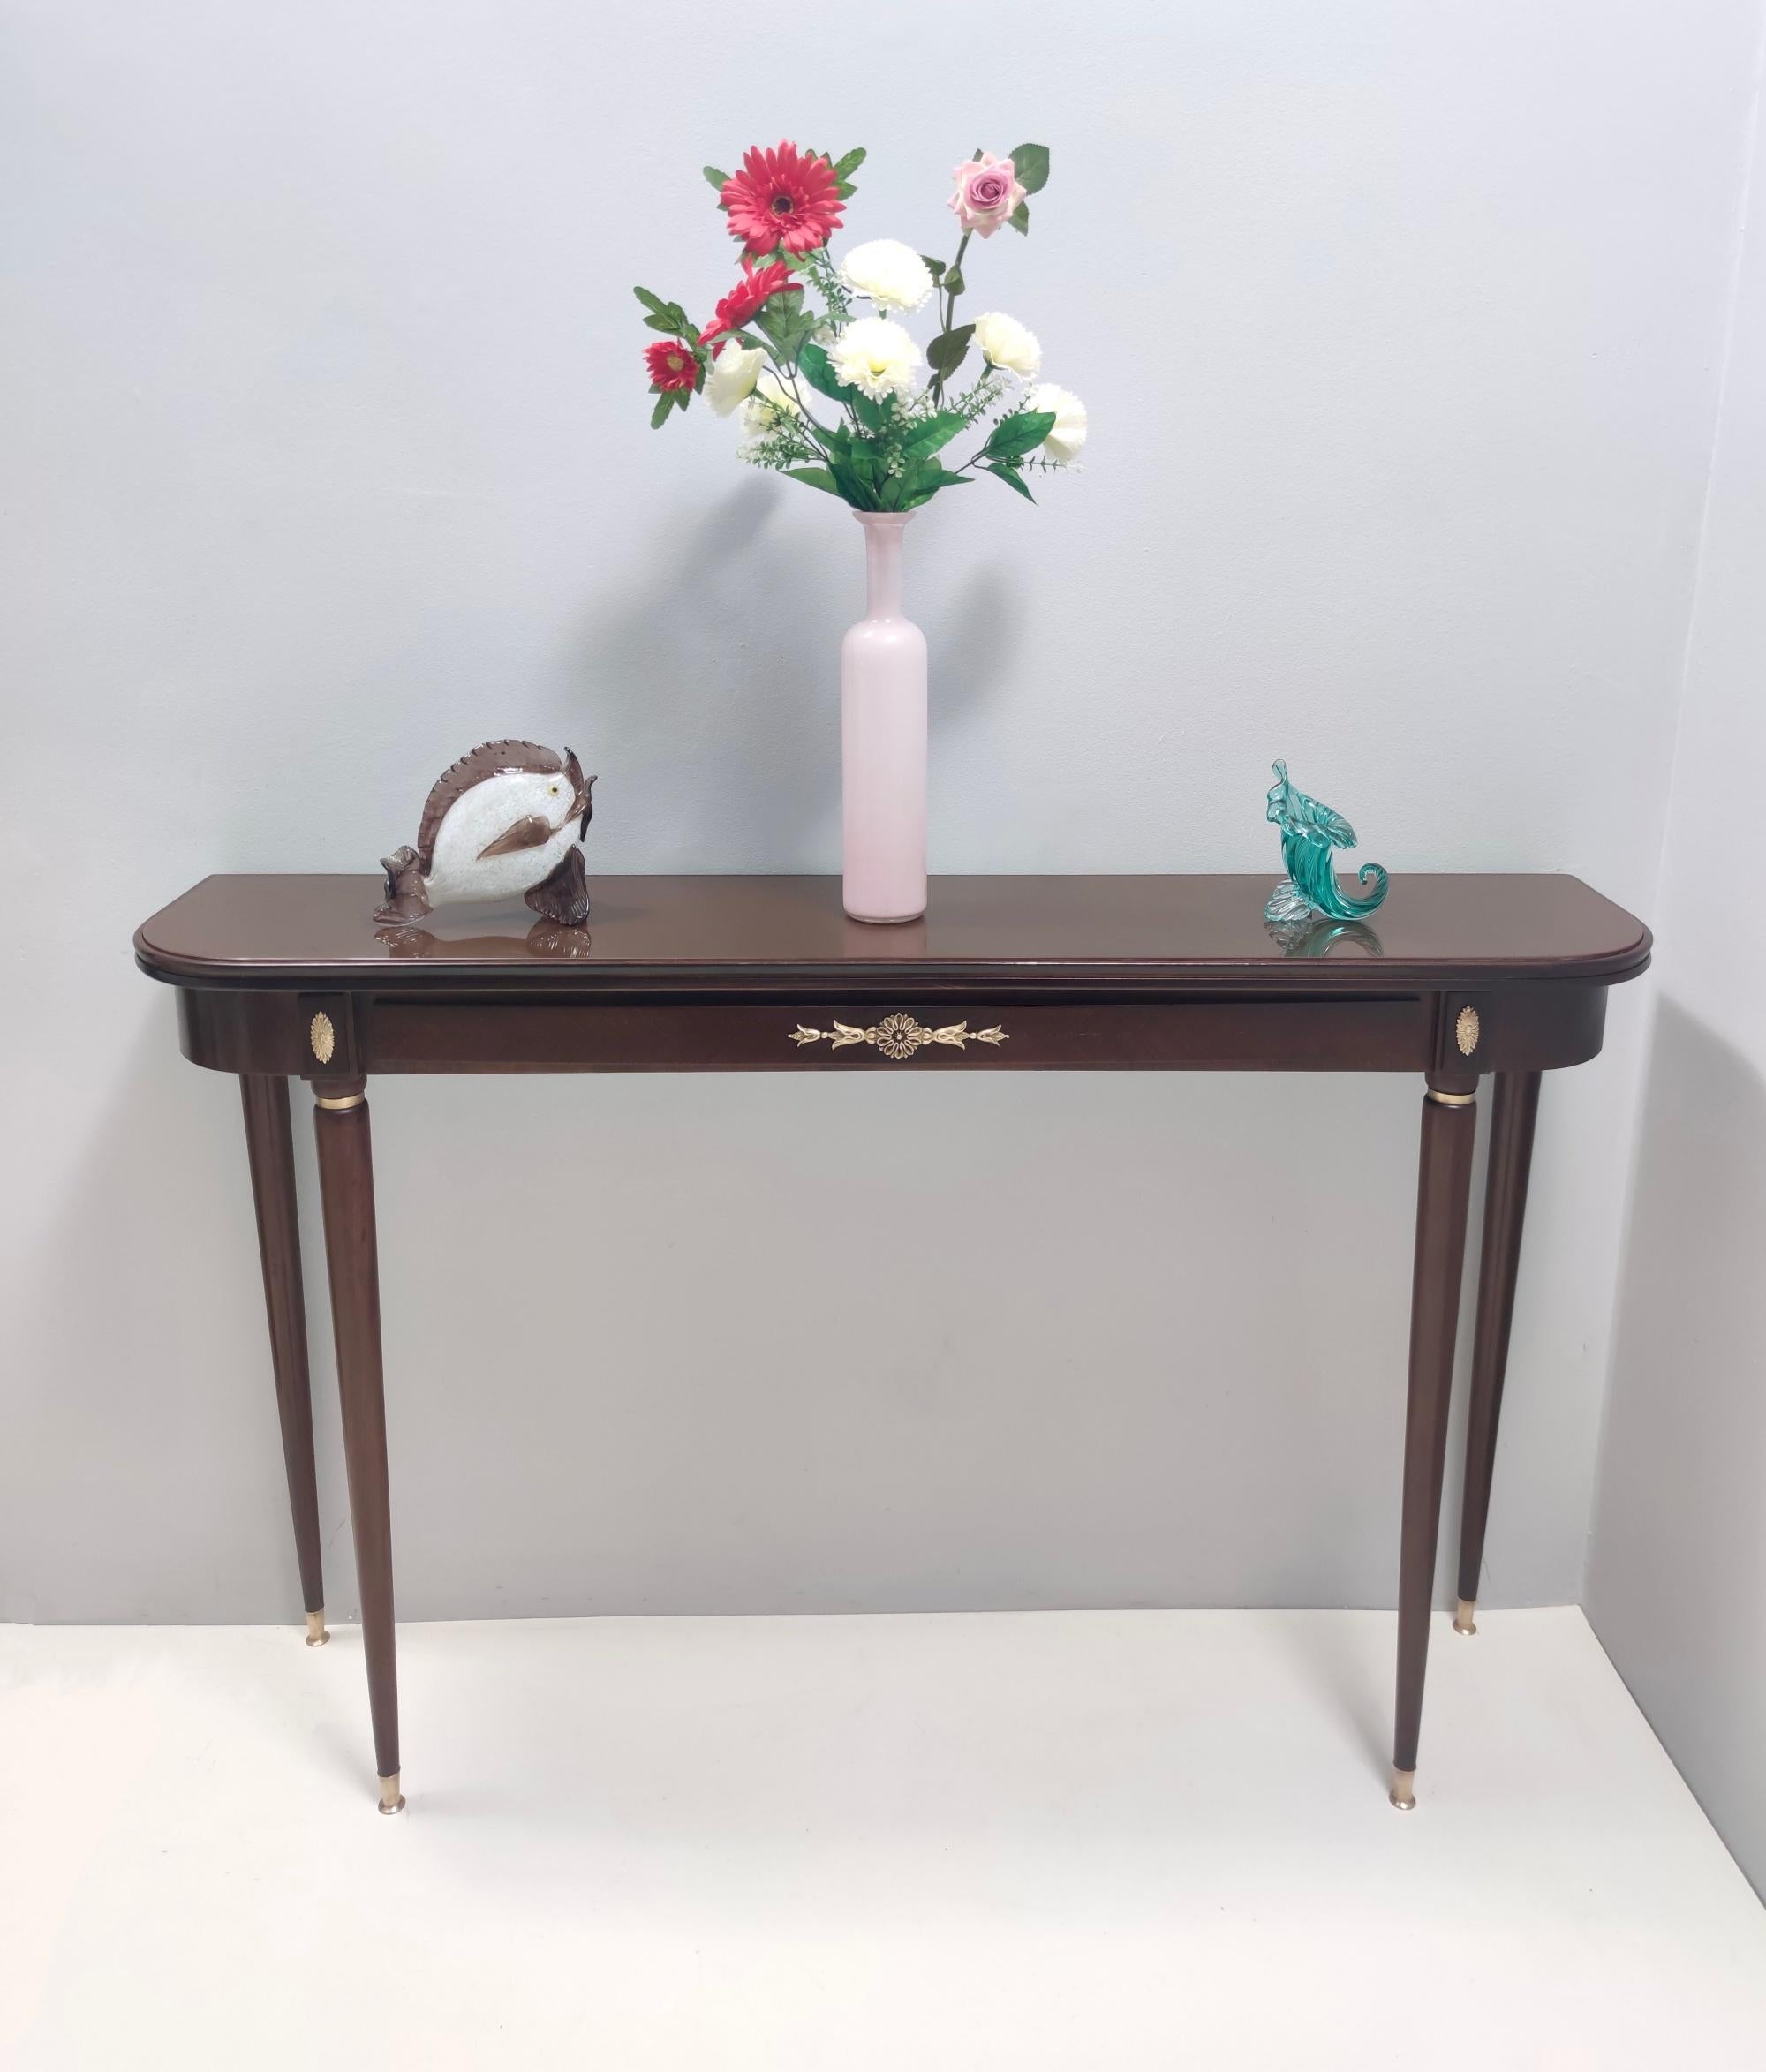 Made in Italy, 1950s.
This console table features an ebonized beech frame, a back-painted glass top and brass details and feet caps. 
It is a vintage piece, therefore it might show slight traces of use, but it can be considered as in excellent